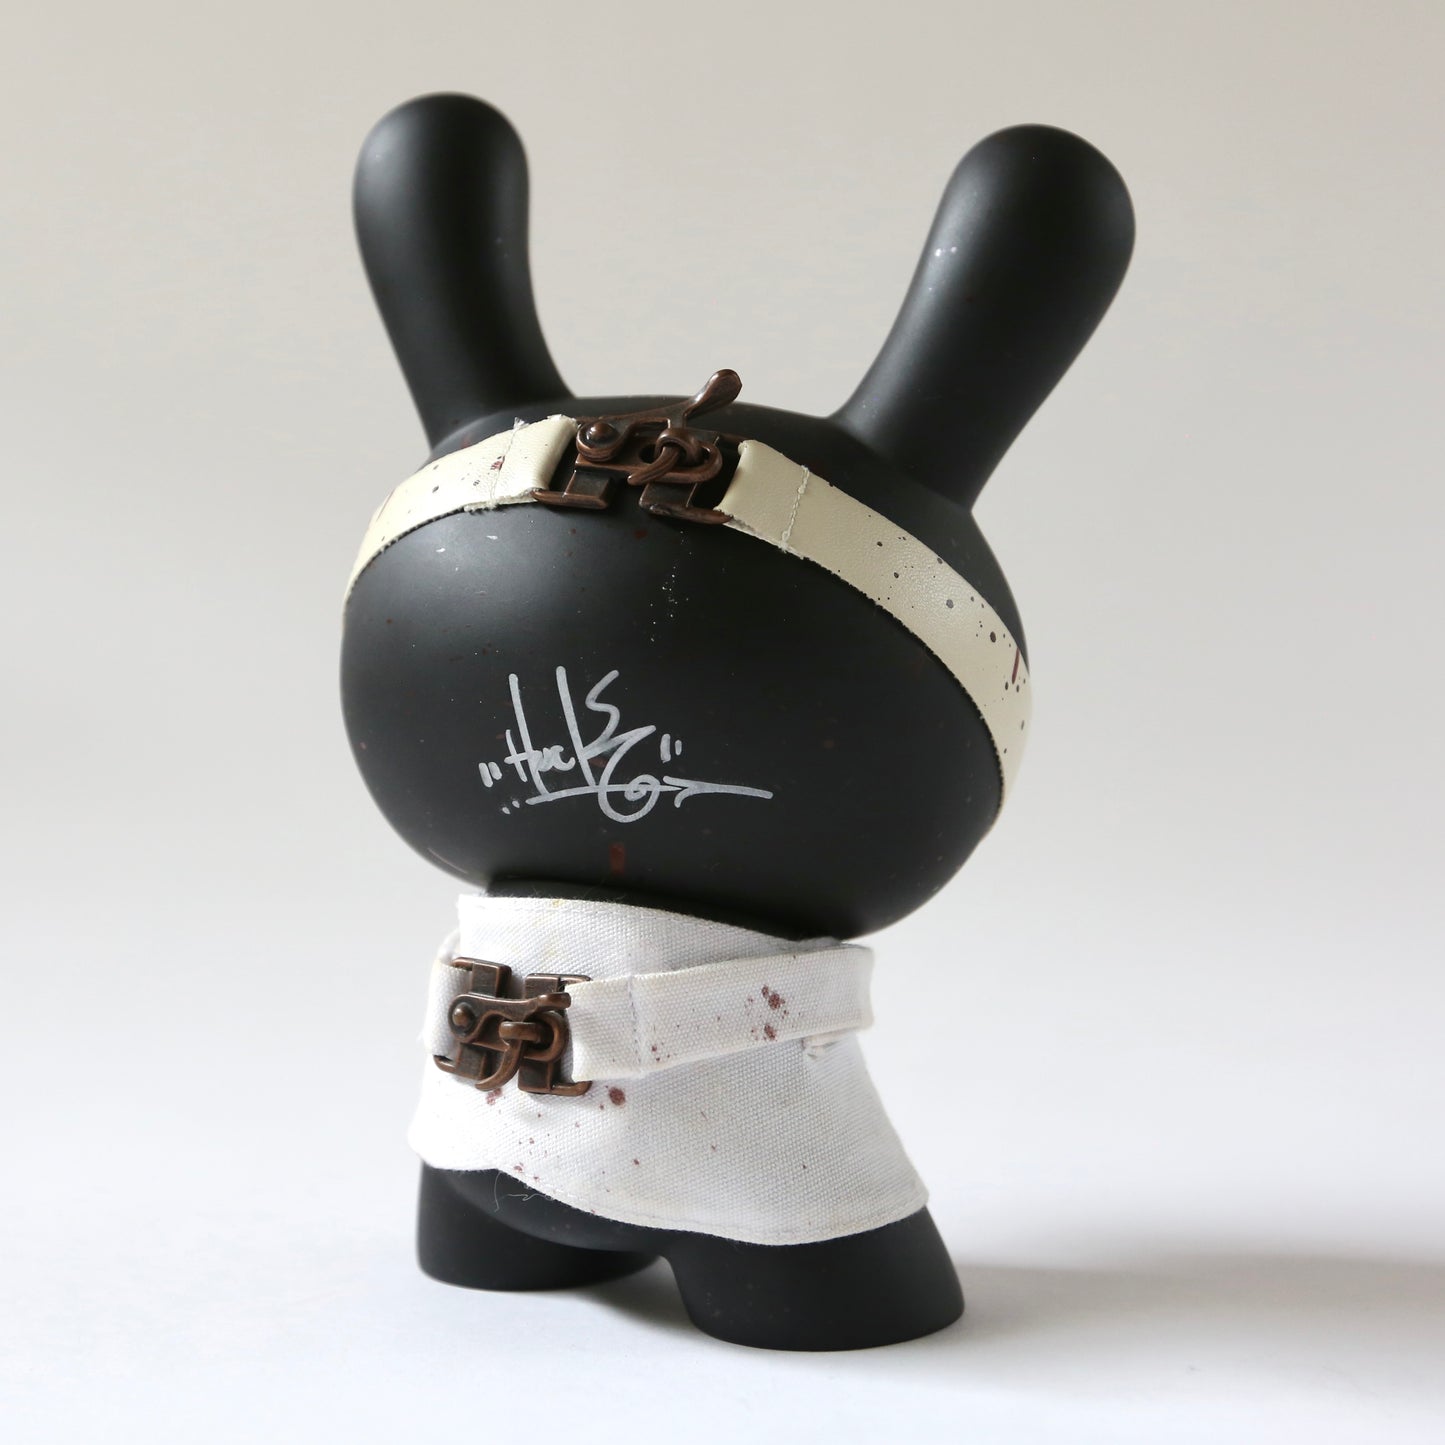 "Hello I'm Insane" 8in Dunny by Huck Gee x Kidrobot *SIGNED*